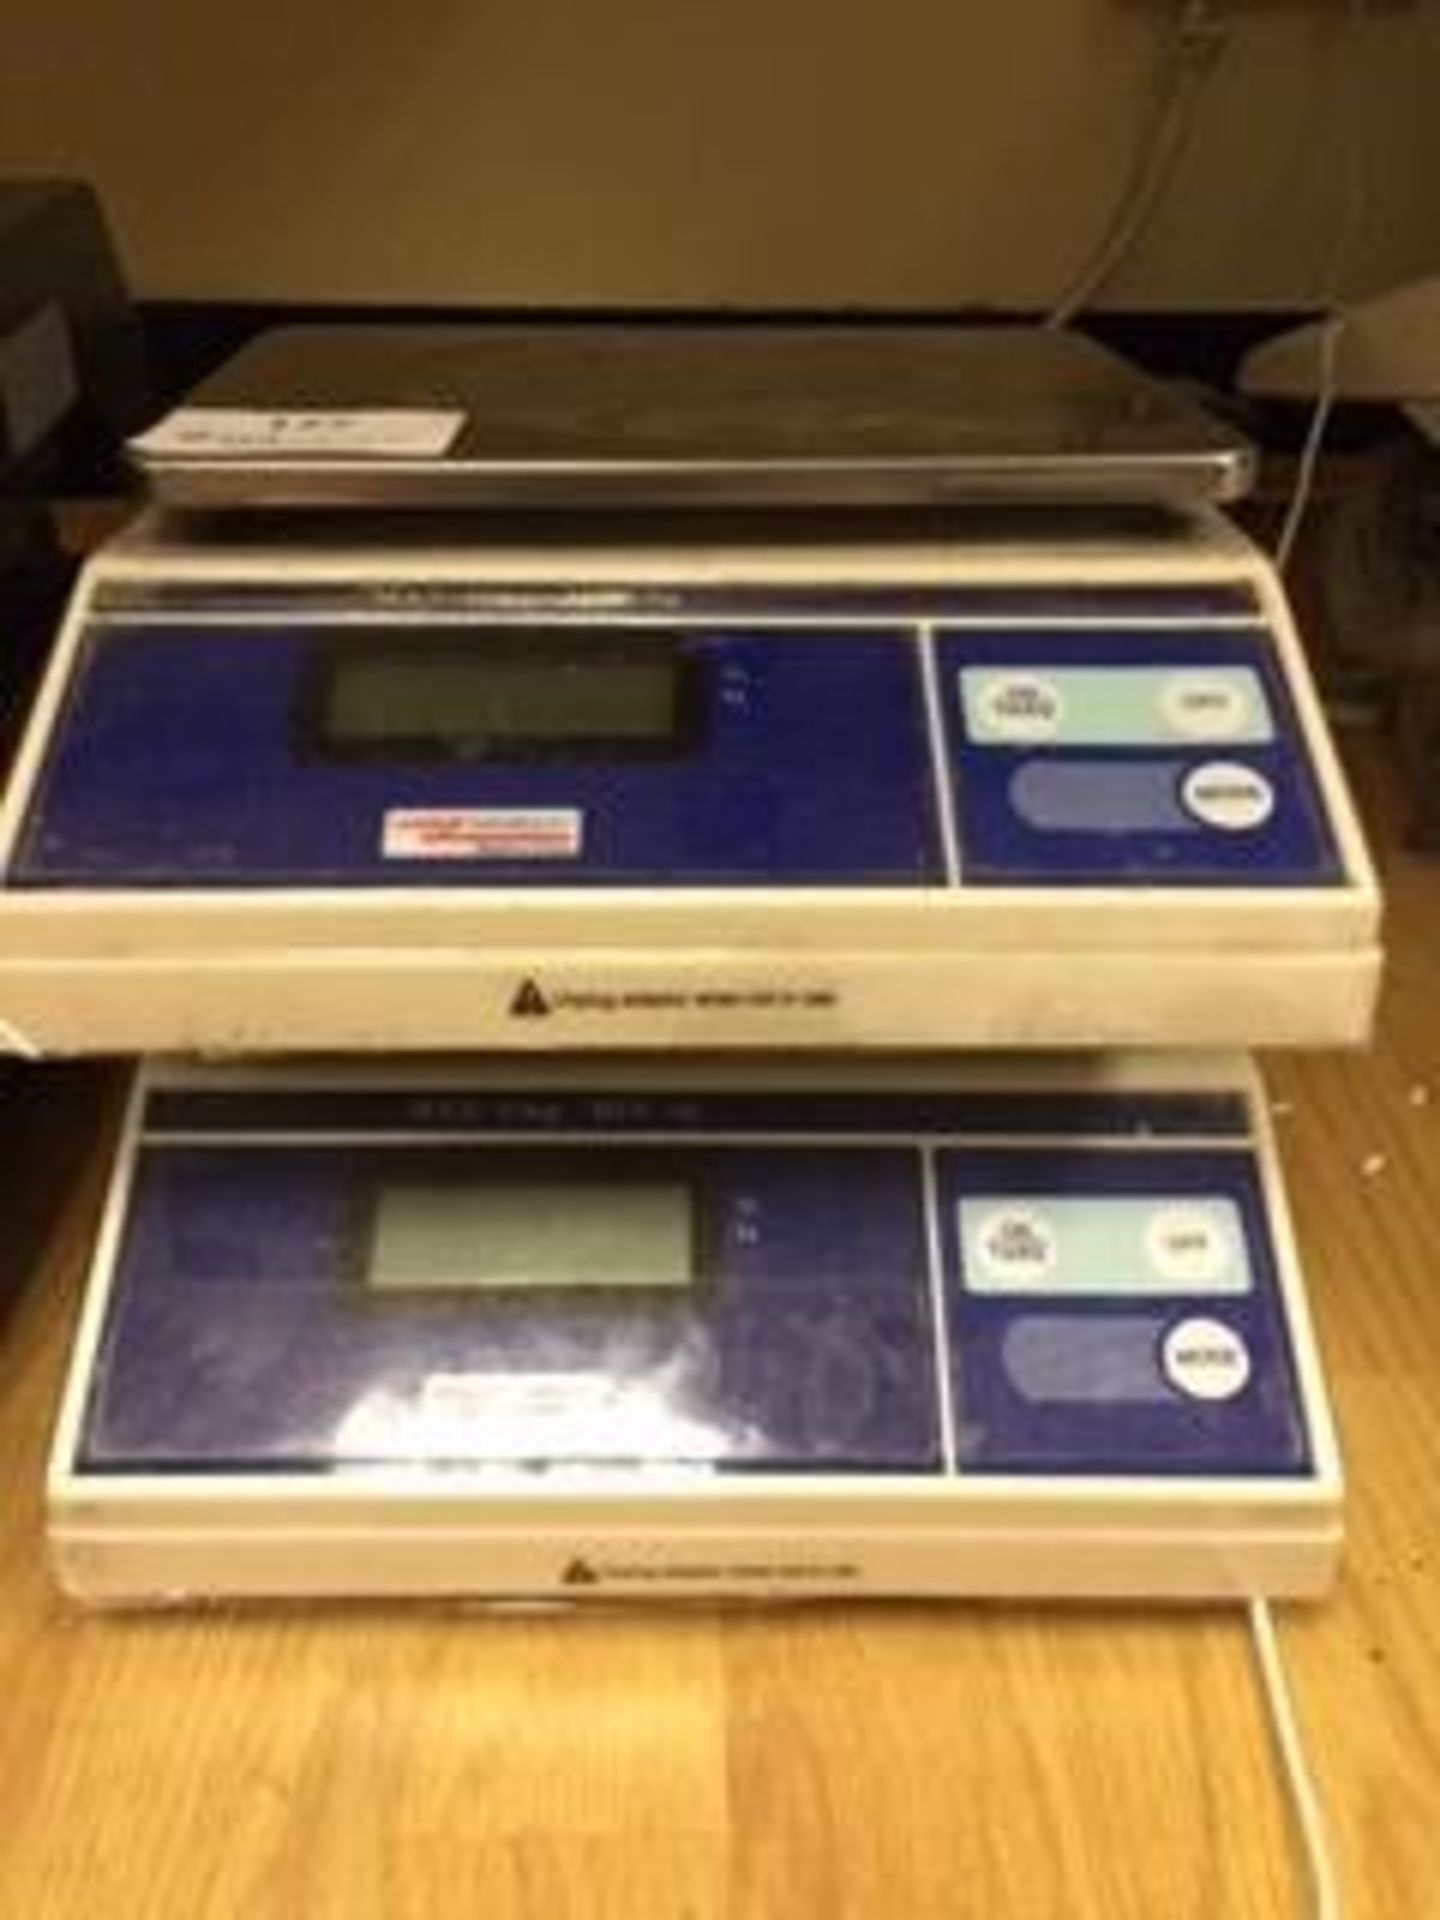 (2) Weigh Station F178 Electronic Platform Scales